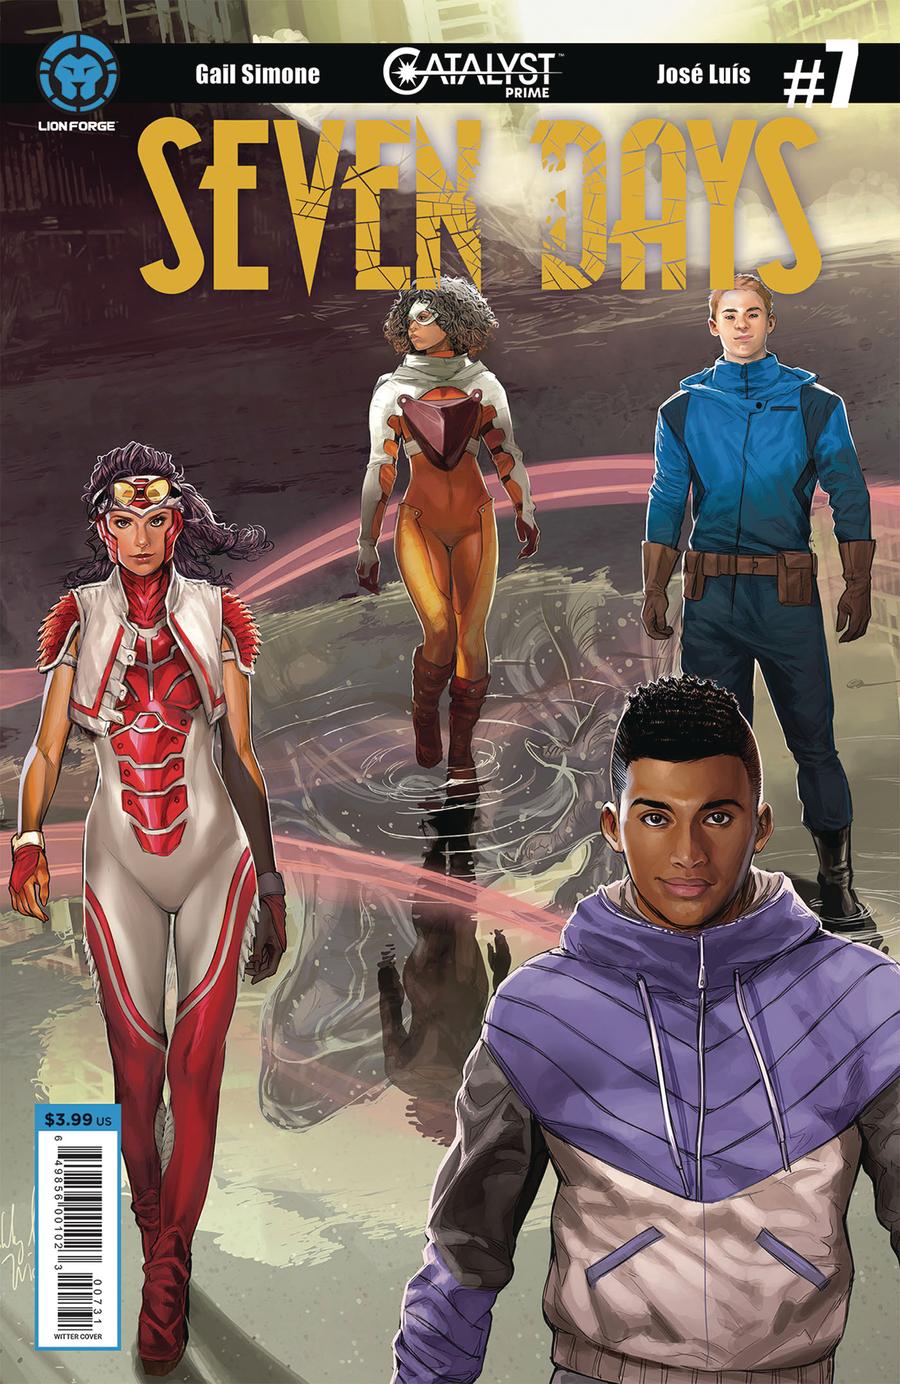 Catalyst Prime Seven Days #7 Cover C Variant Stjepan Sejic Connecting Cover